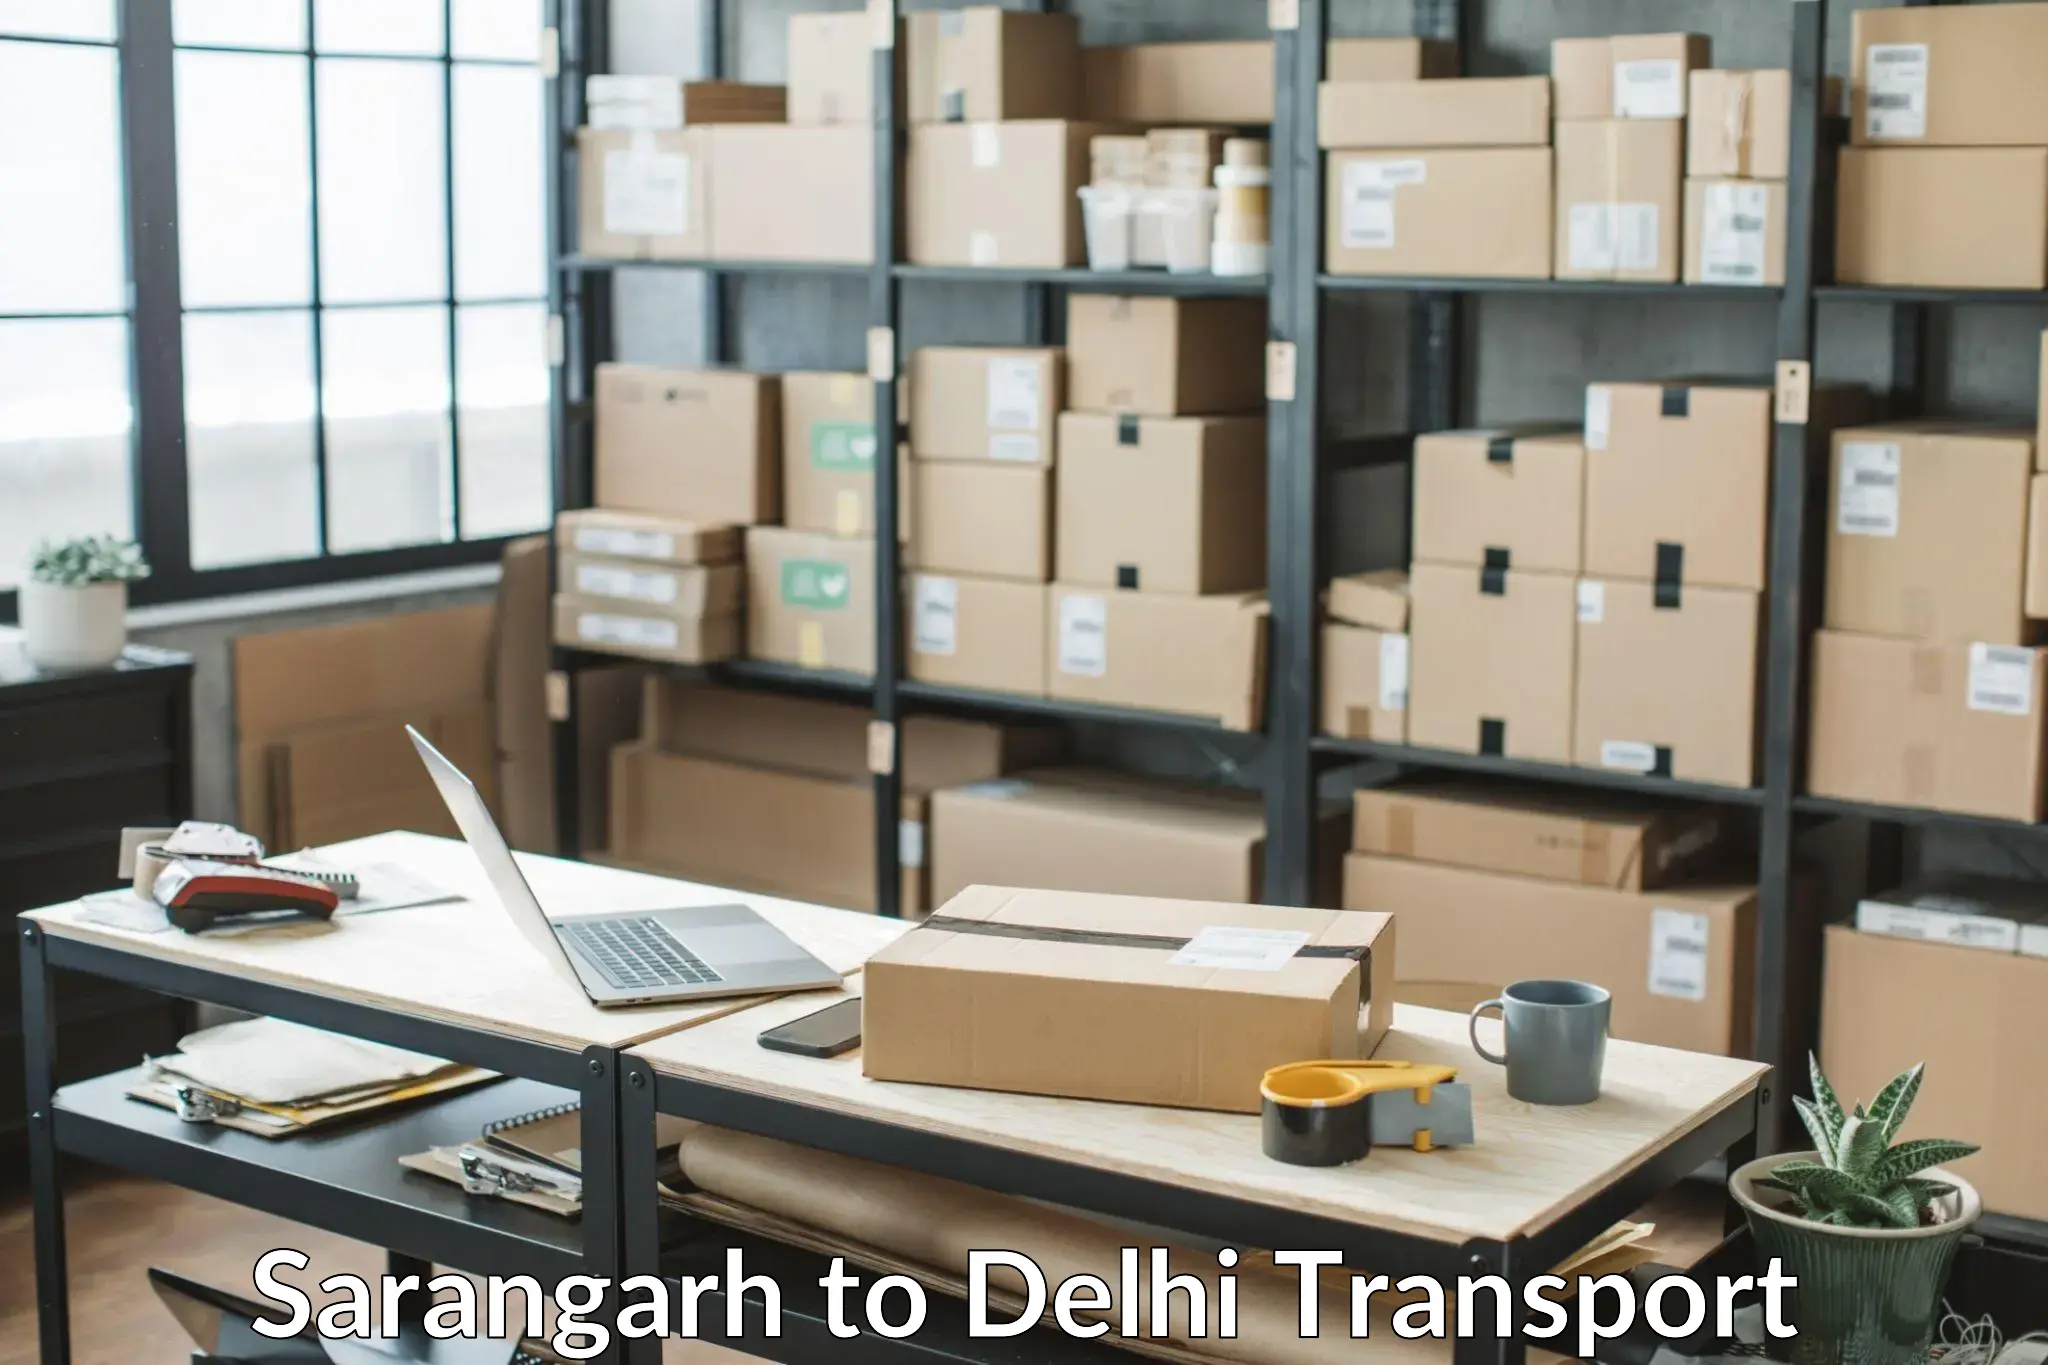 Transport bike from one state to another Sarangarh to Delhi Technological University DTU